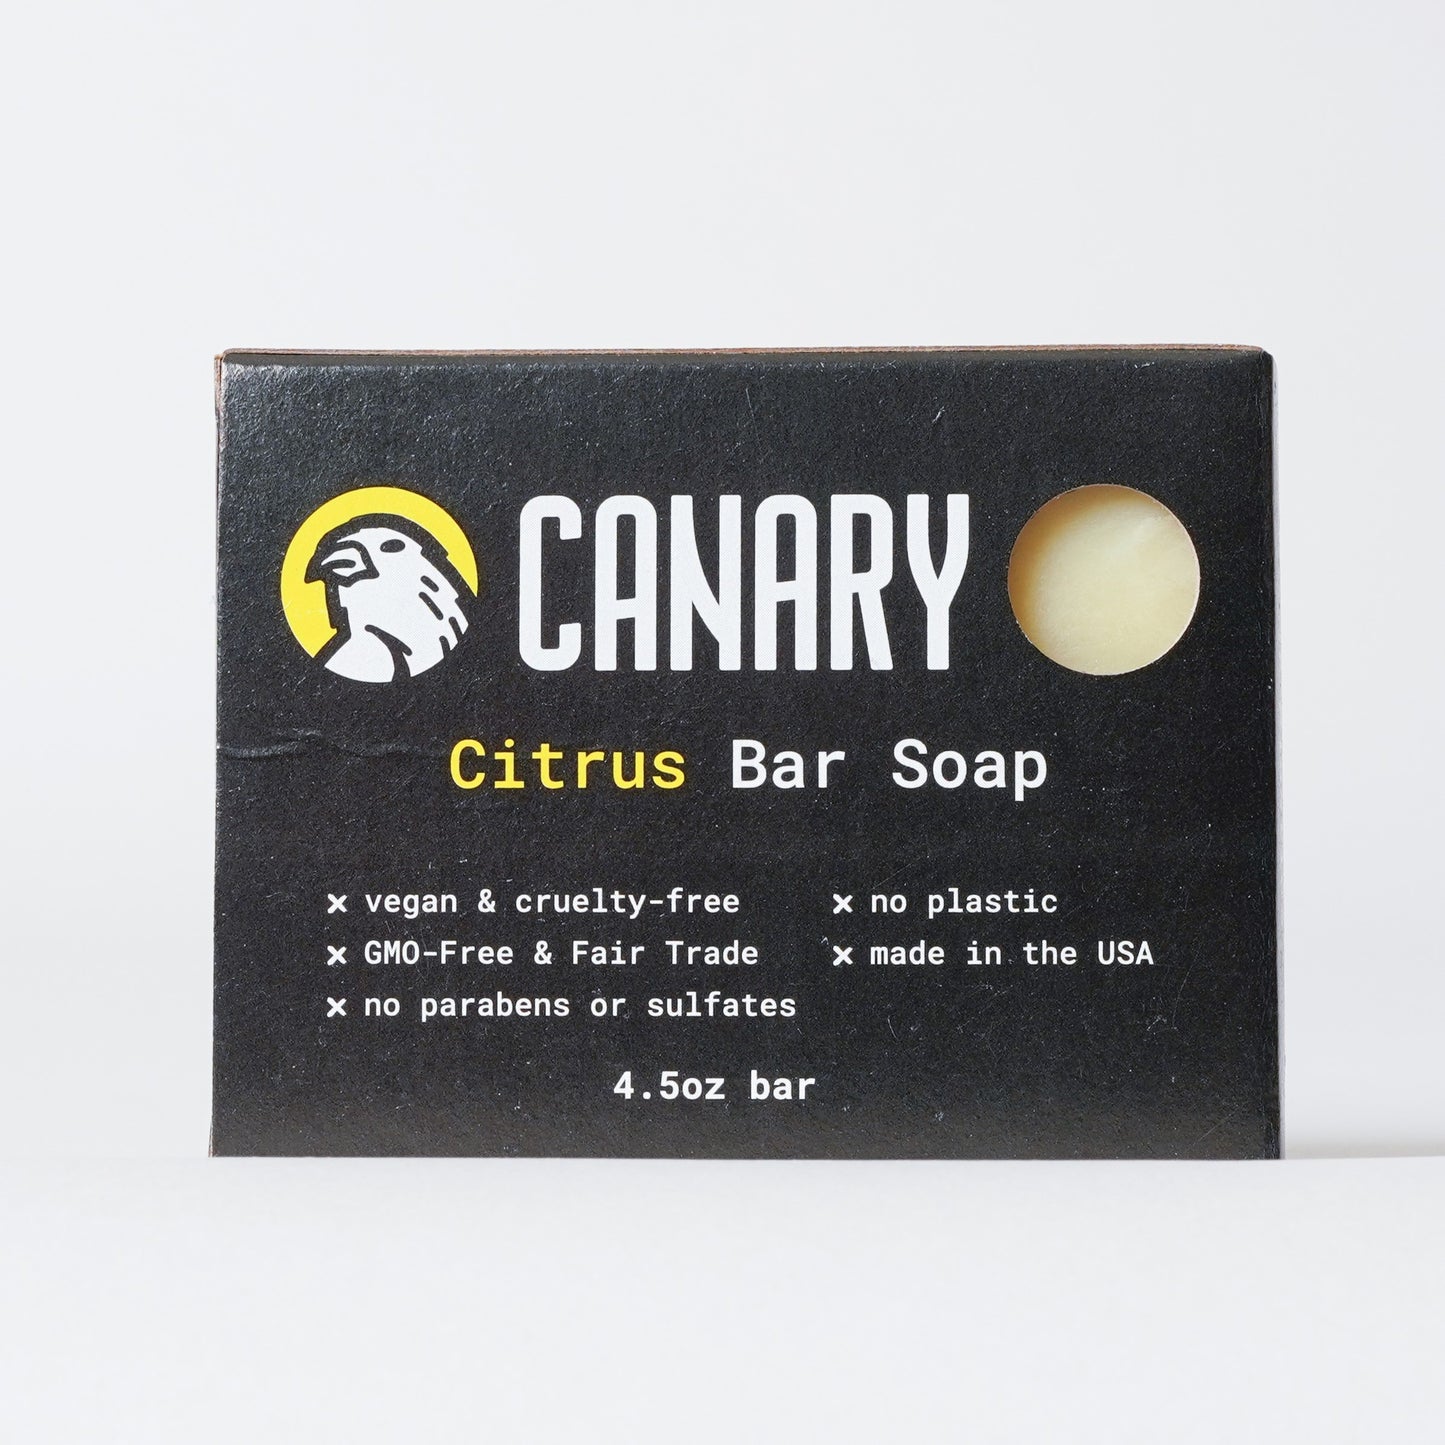 Canary Citrus Bar Soap in plastic-free packaging